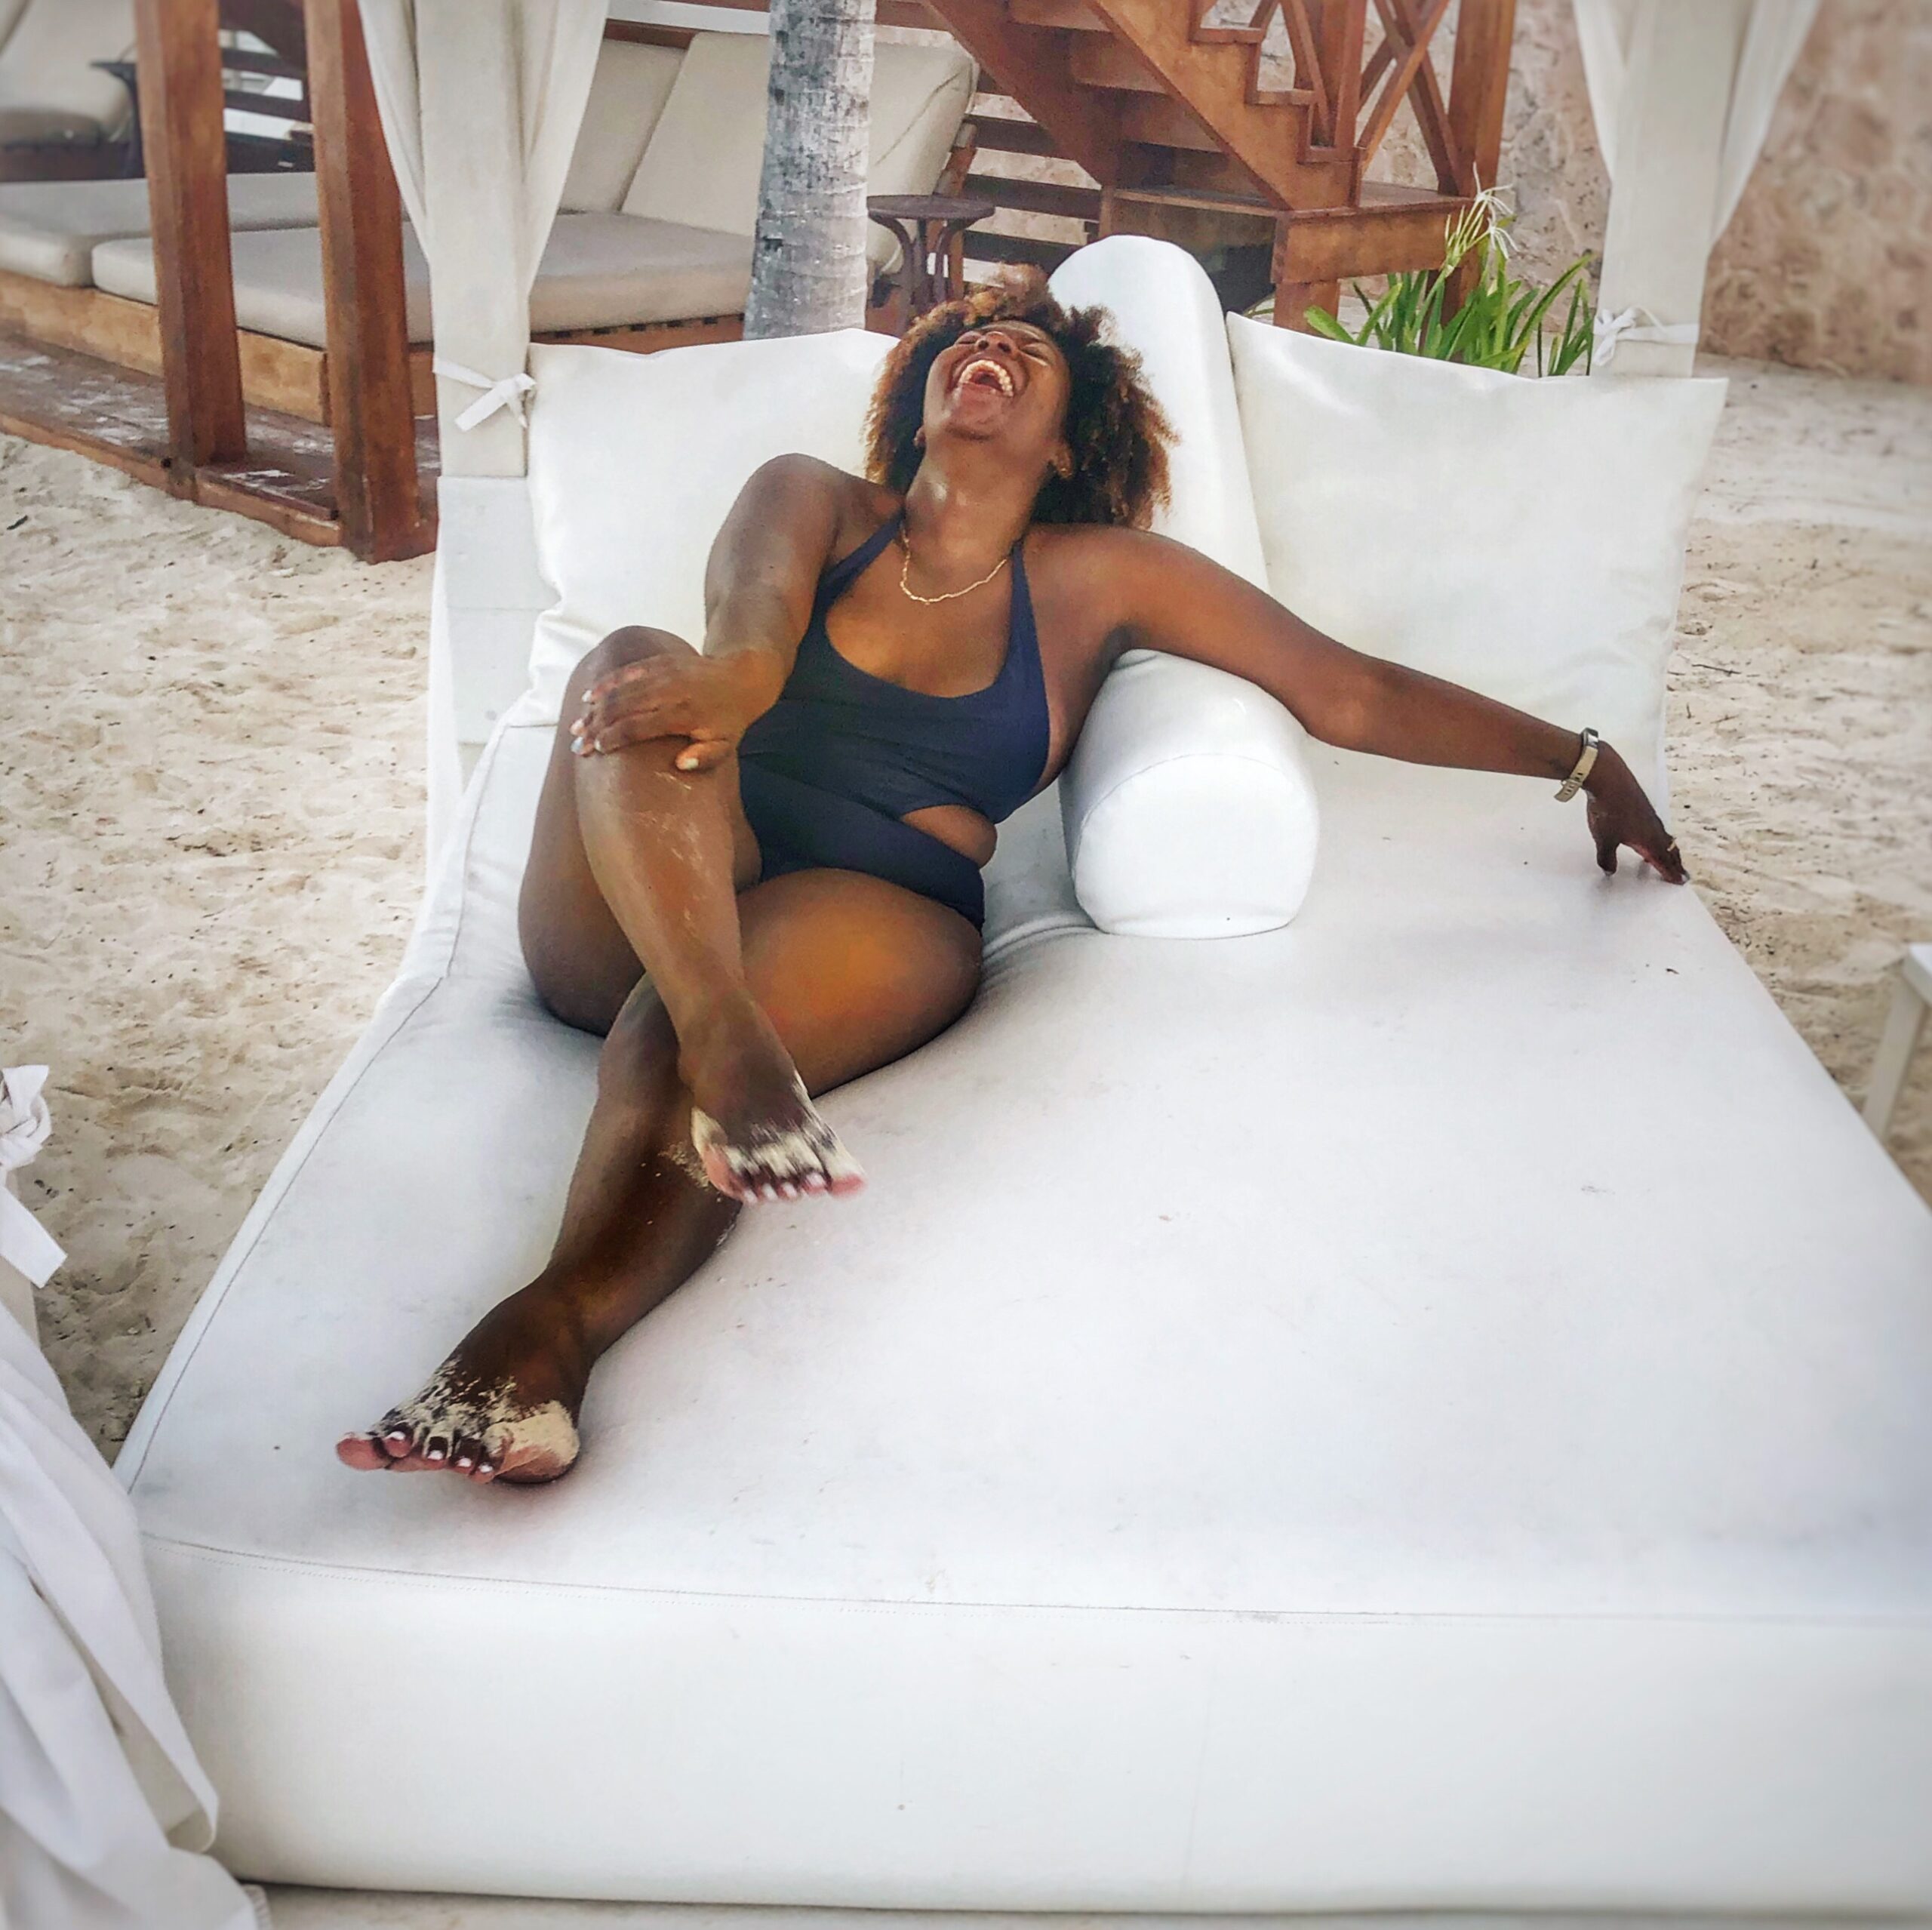 Cancun Mexico Travel Guide 2019 (Baecation)